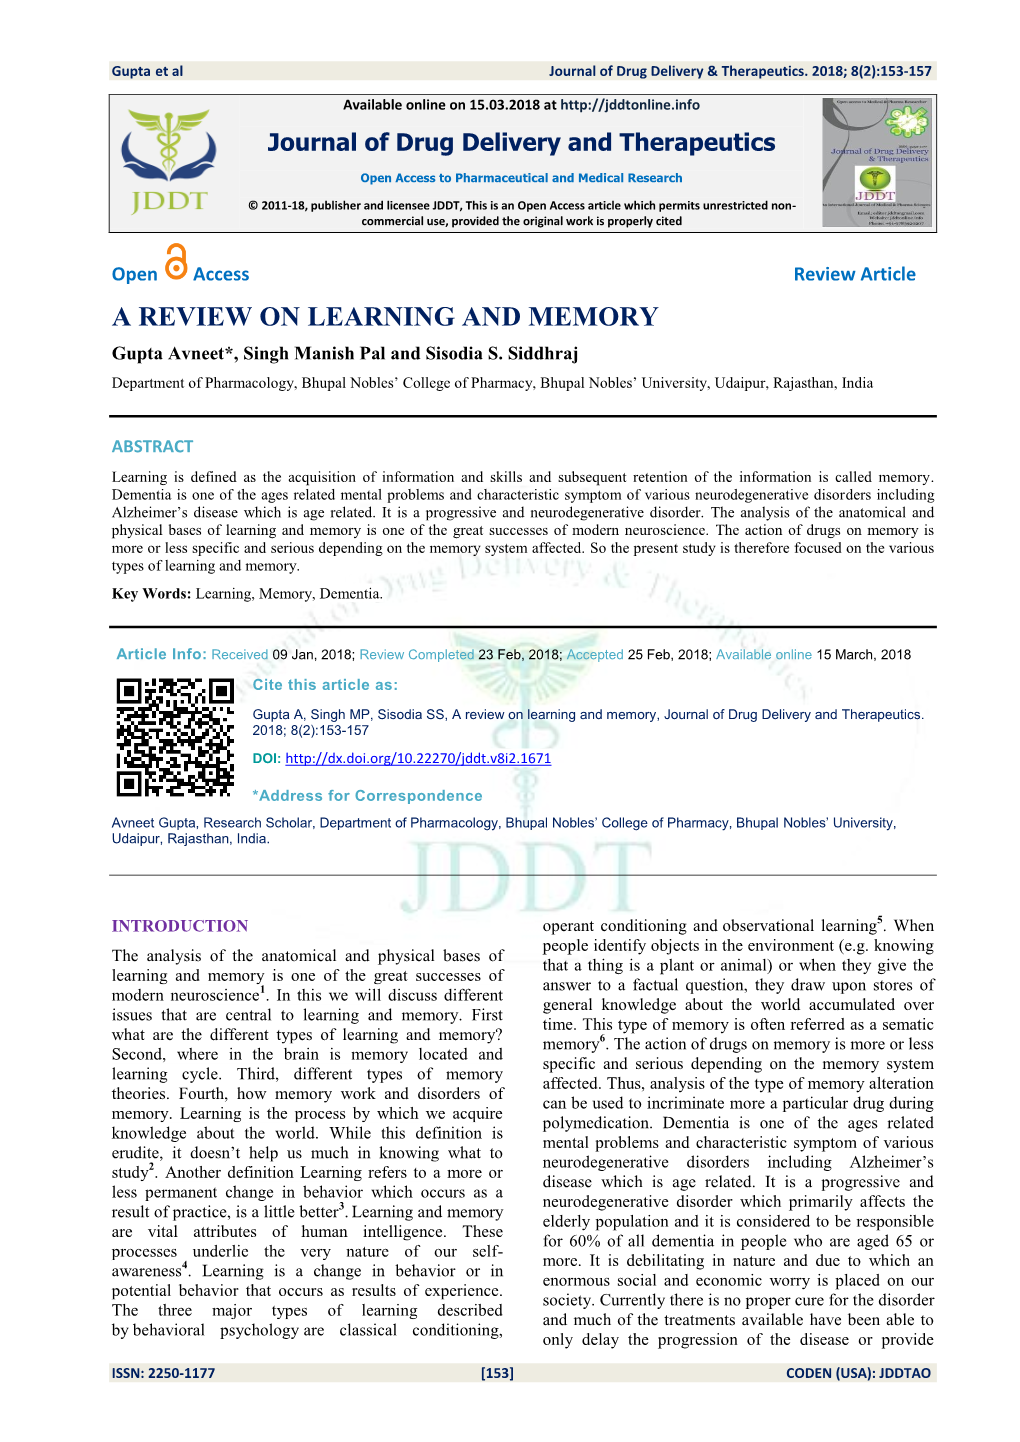 A REVIEW on LEARNING and MEMORY Gupta Avneet*, Singh Manish Pal and Sisodia S